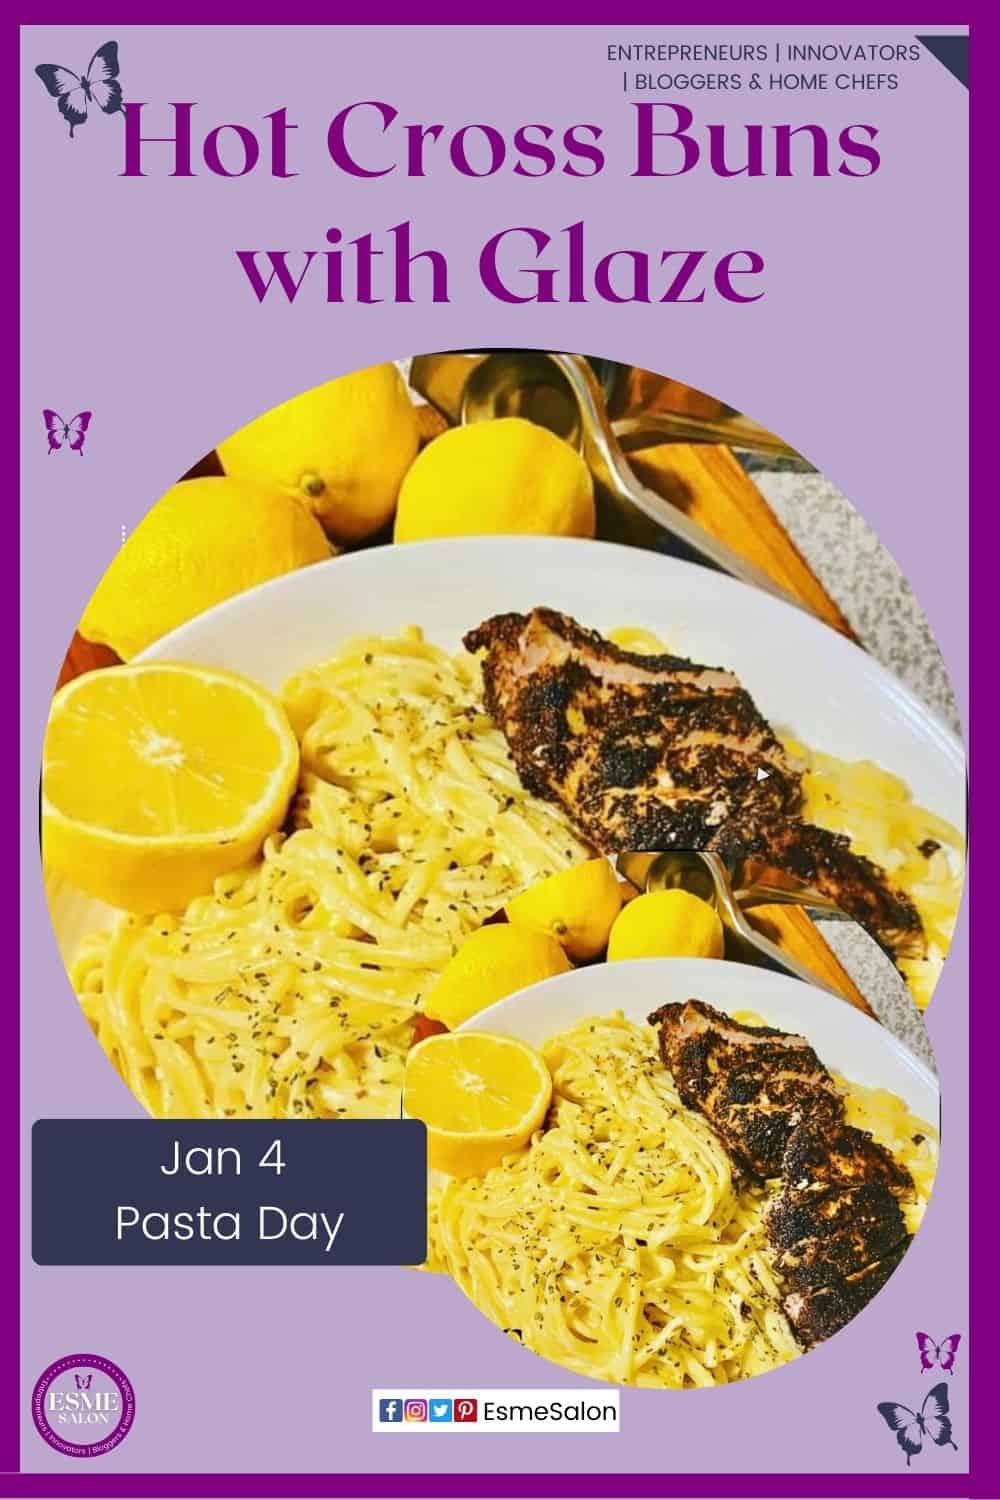 an image of a plate with pasta in lemon sauce and sliced chicken on the side